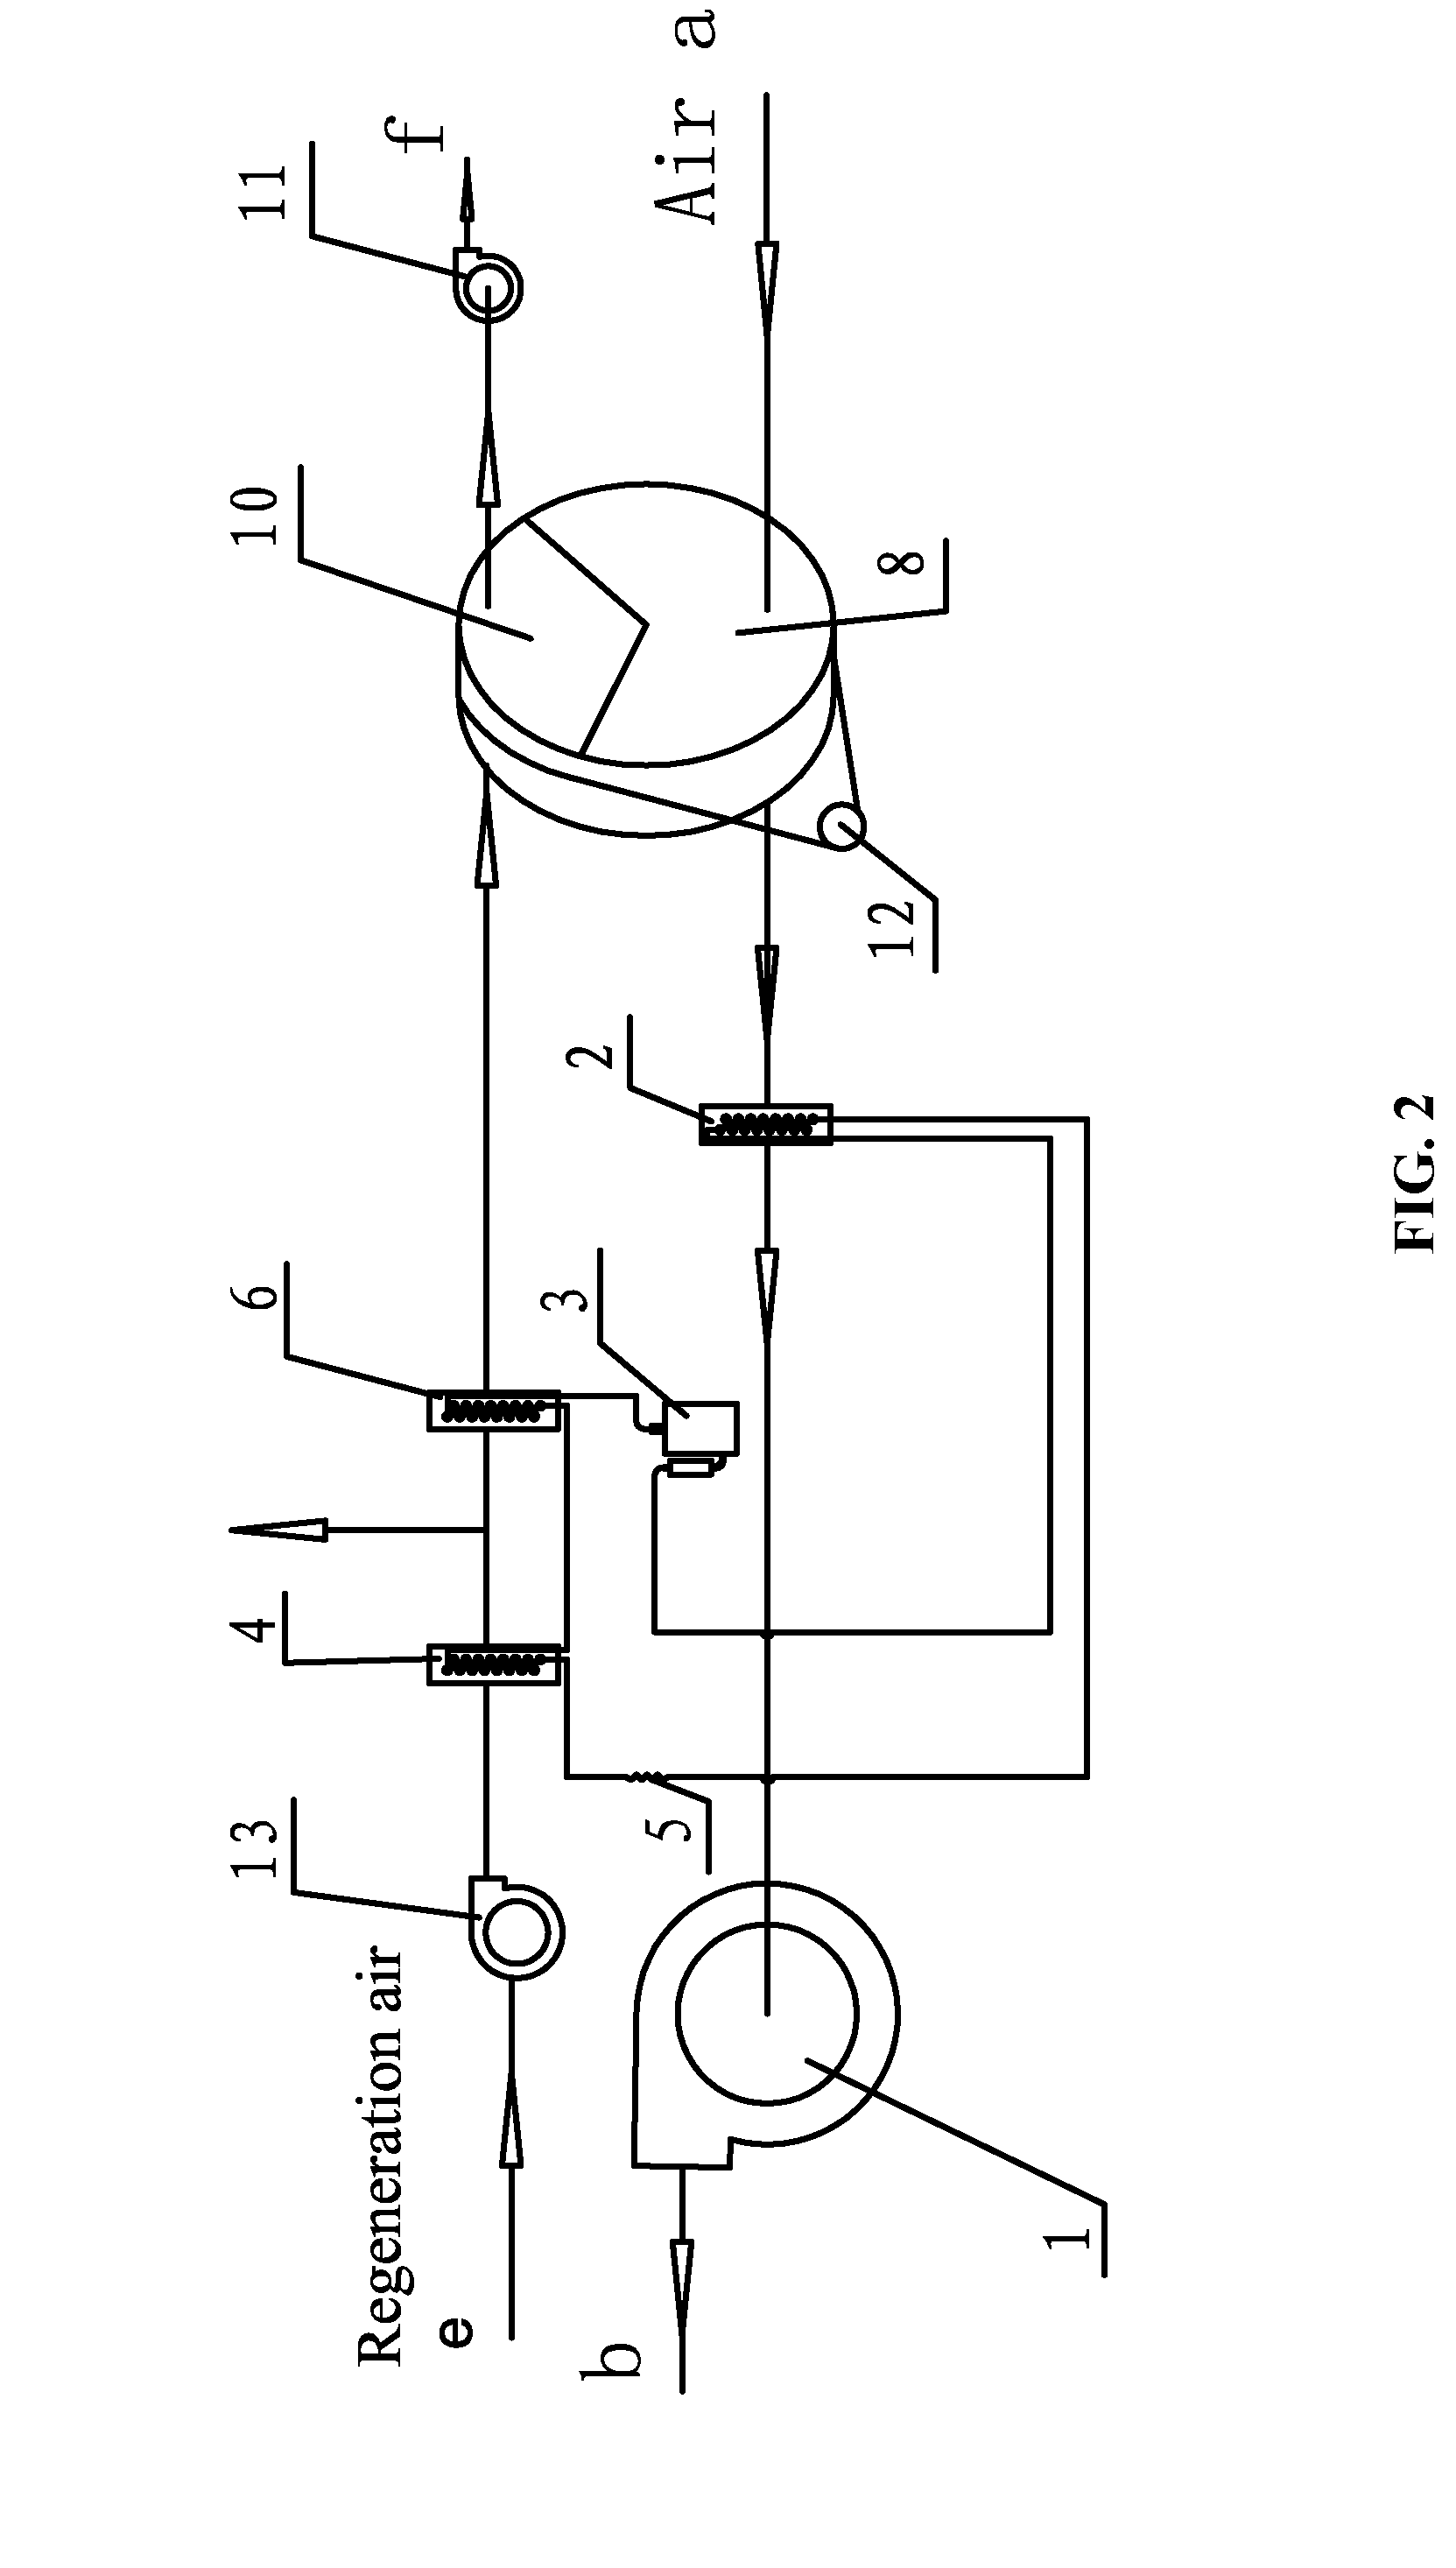 Coupled air-conditioning device